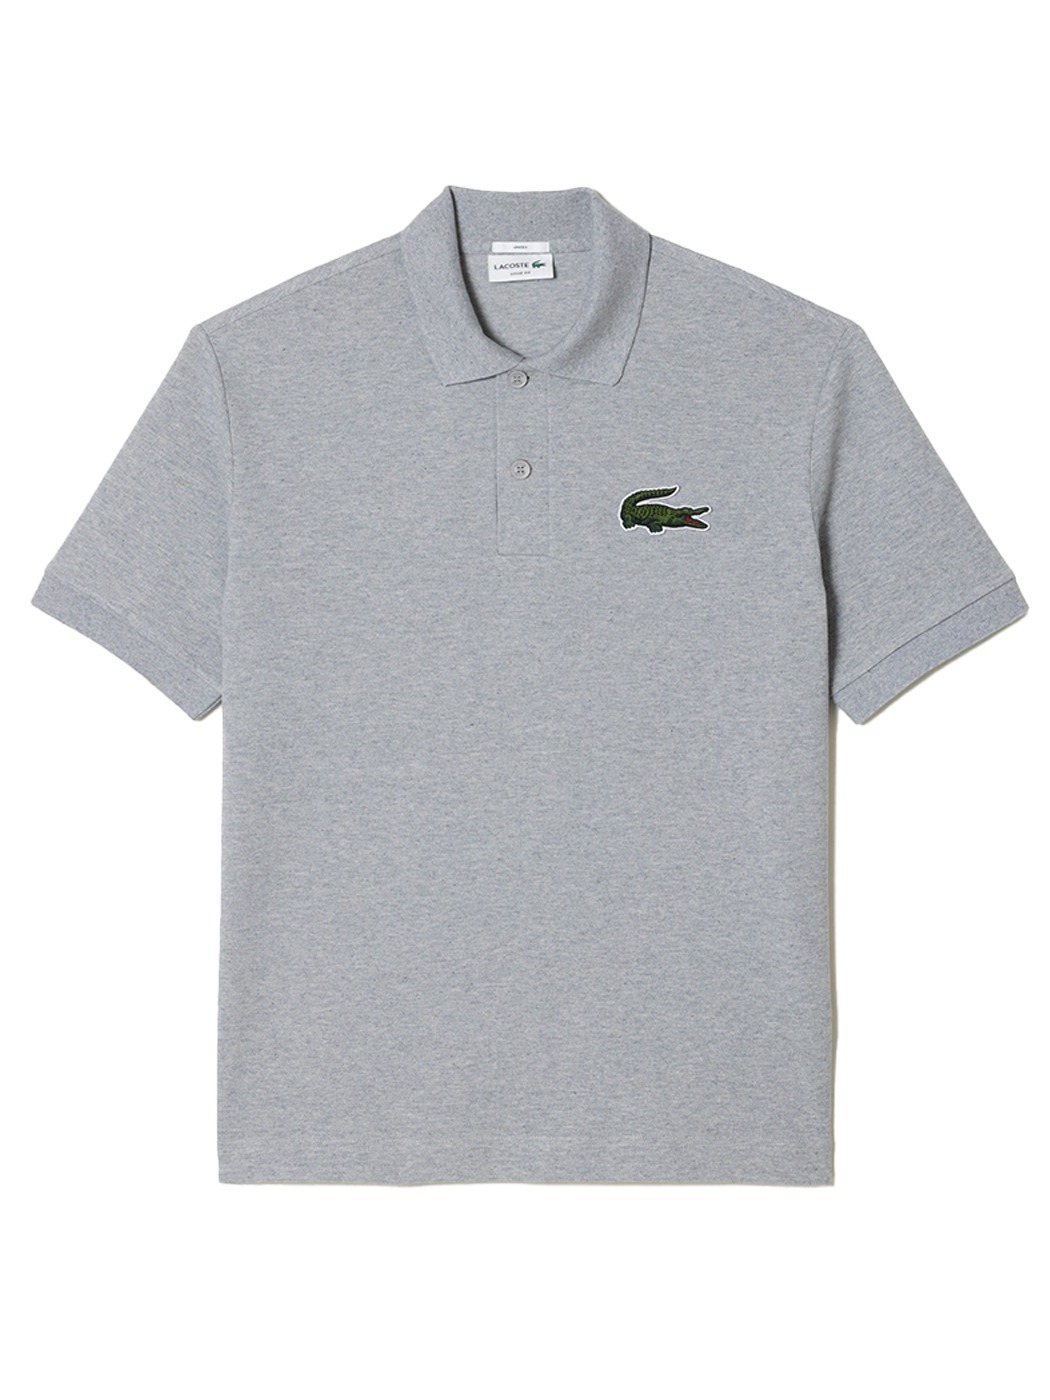 Lacoste SS23 Unisex Loose Fit Short Sleeve PK Collar Polo T-Shirt (Gray)